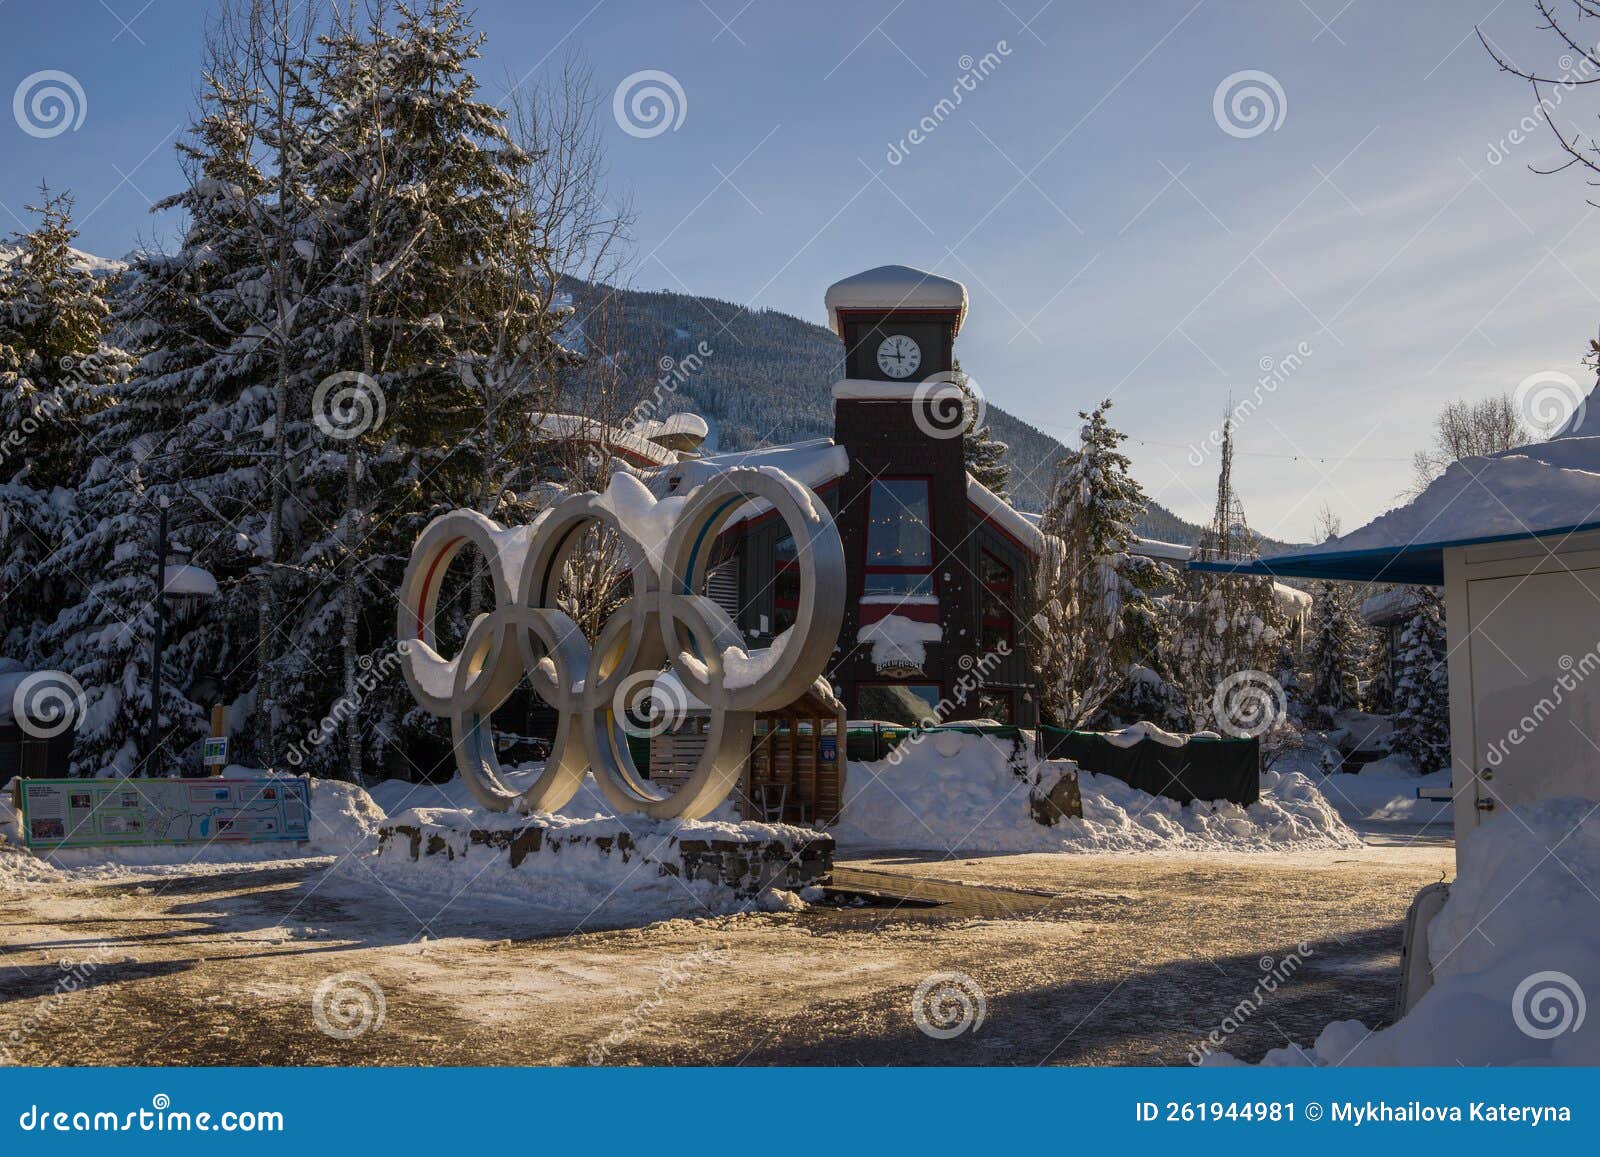 HD wallpaper: Olympics Symbol signage near pine trees, Whistler, Rings,  snow | Wallpaper Flare